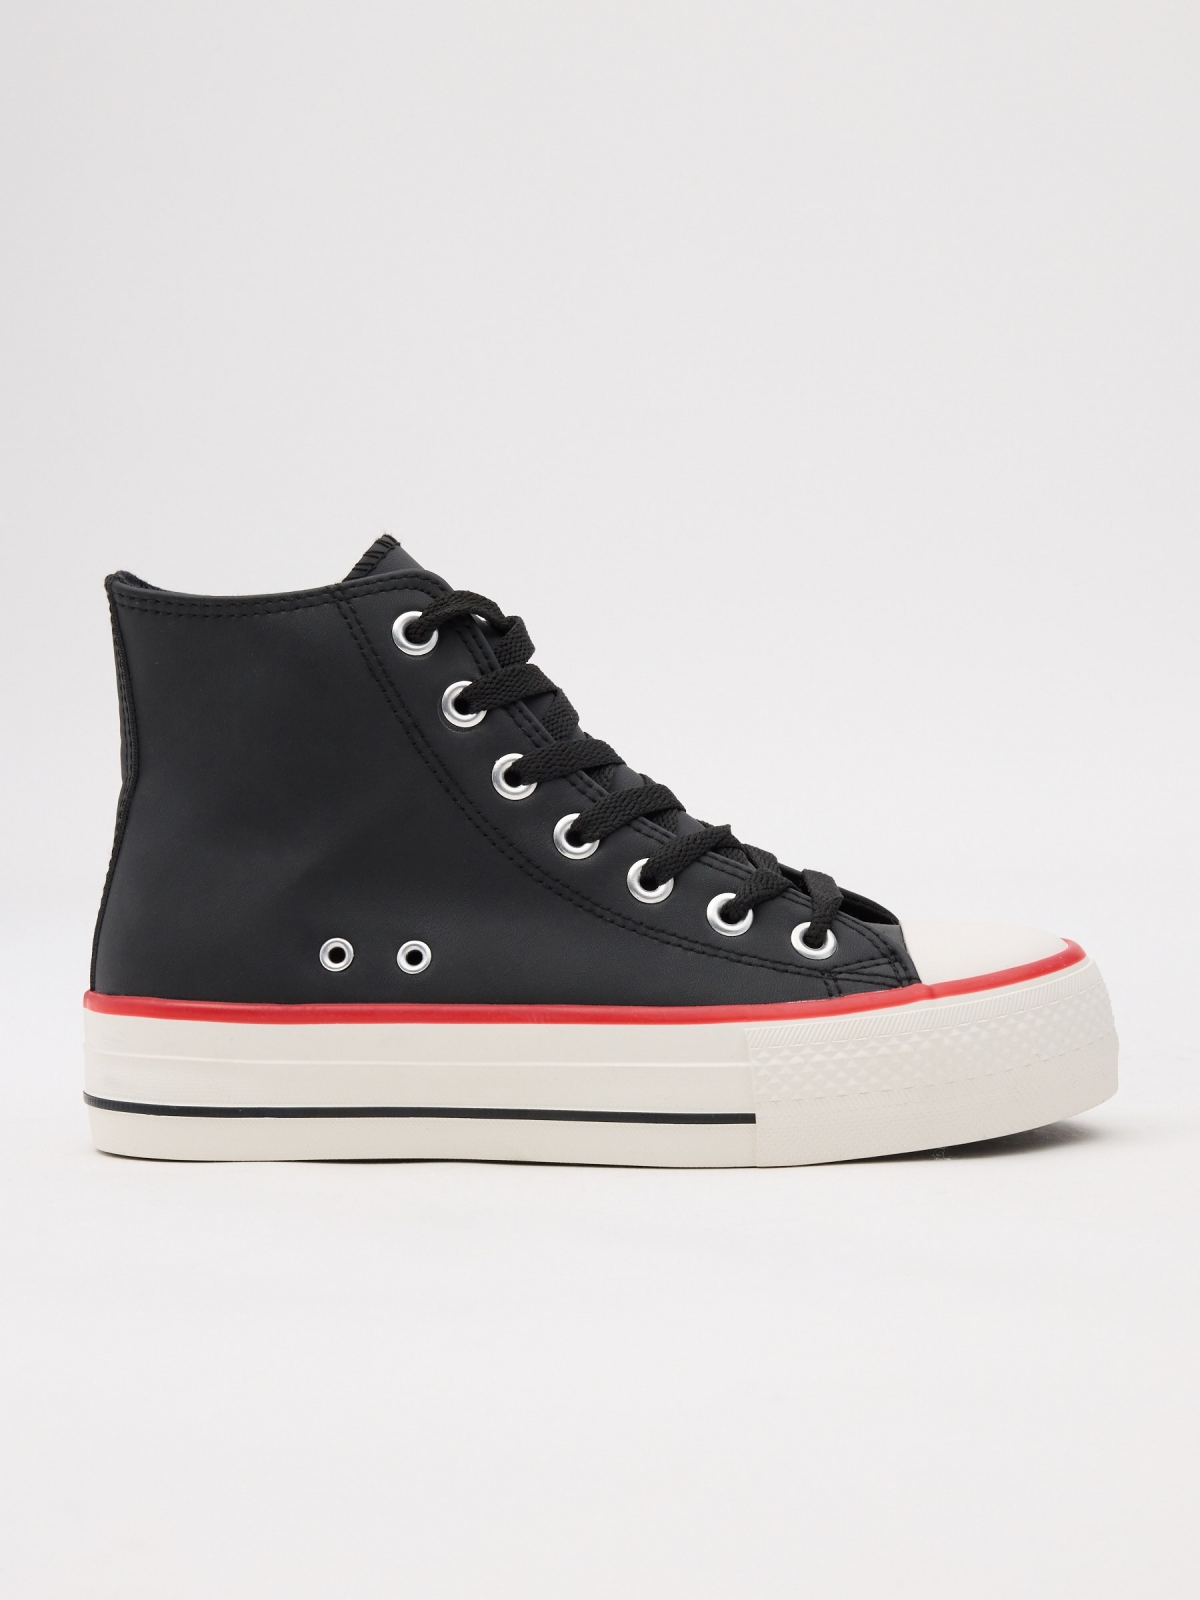 Patent leather boot sneakers